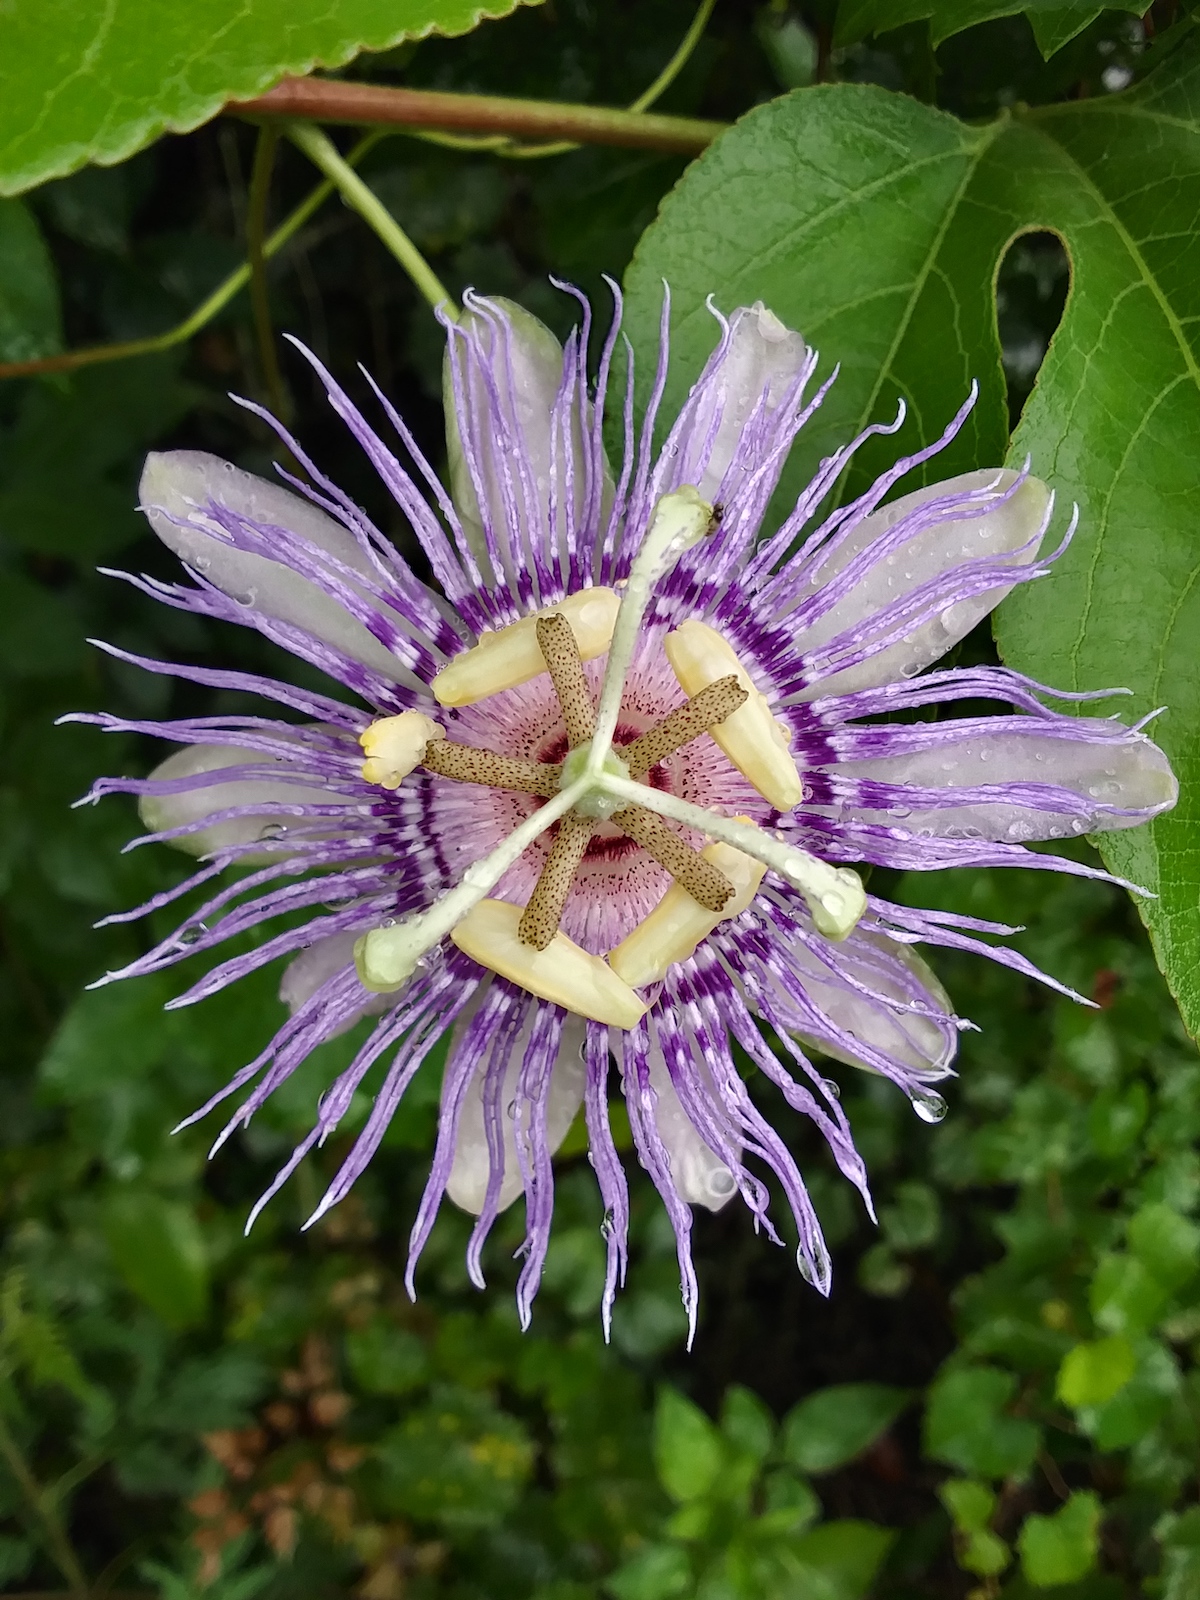 Passion Flower By Blitchton Road In Ocala